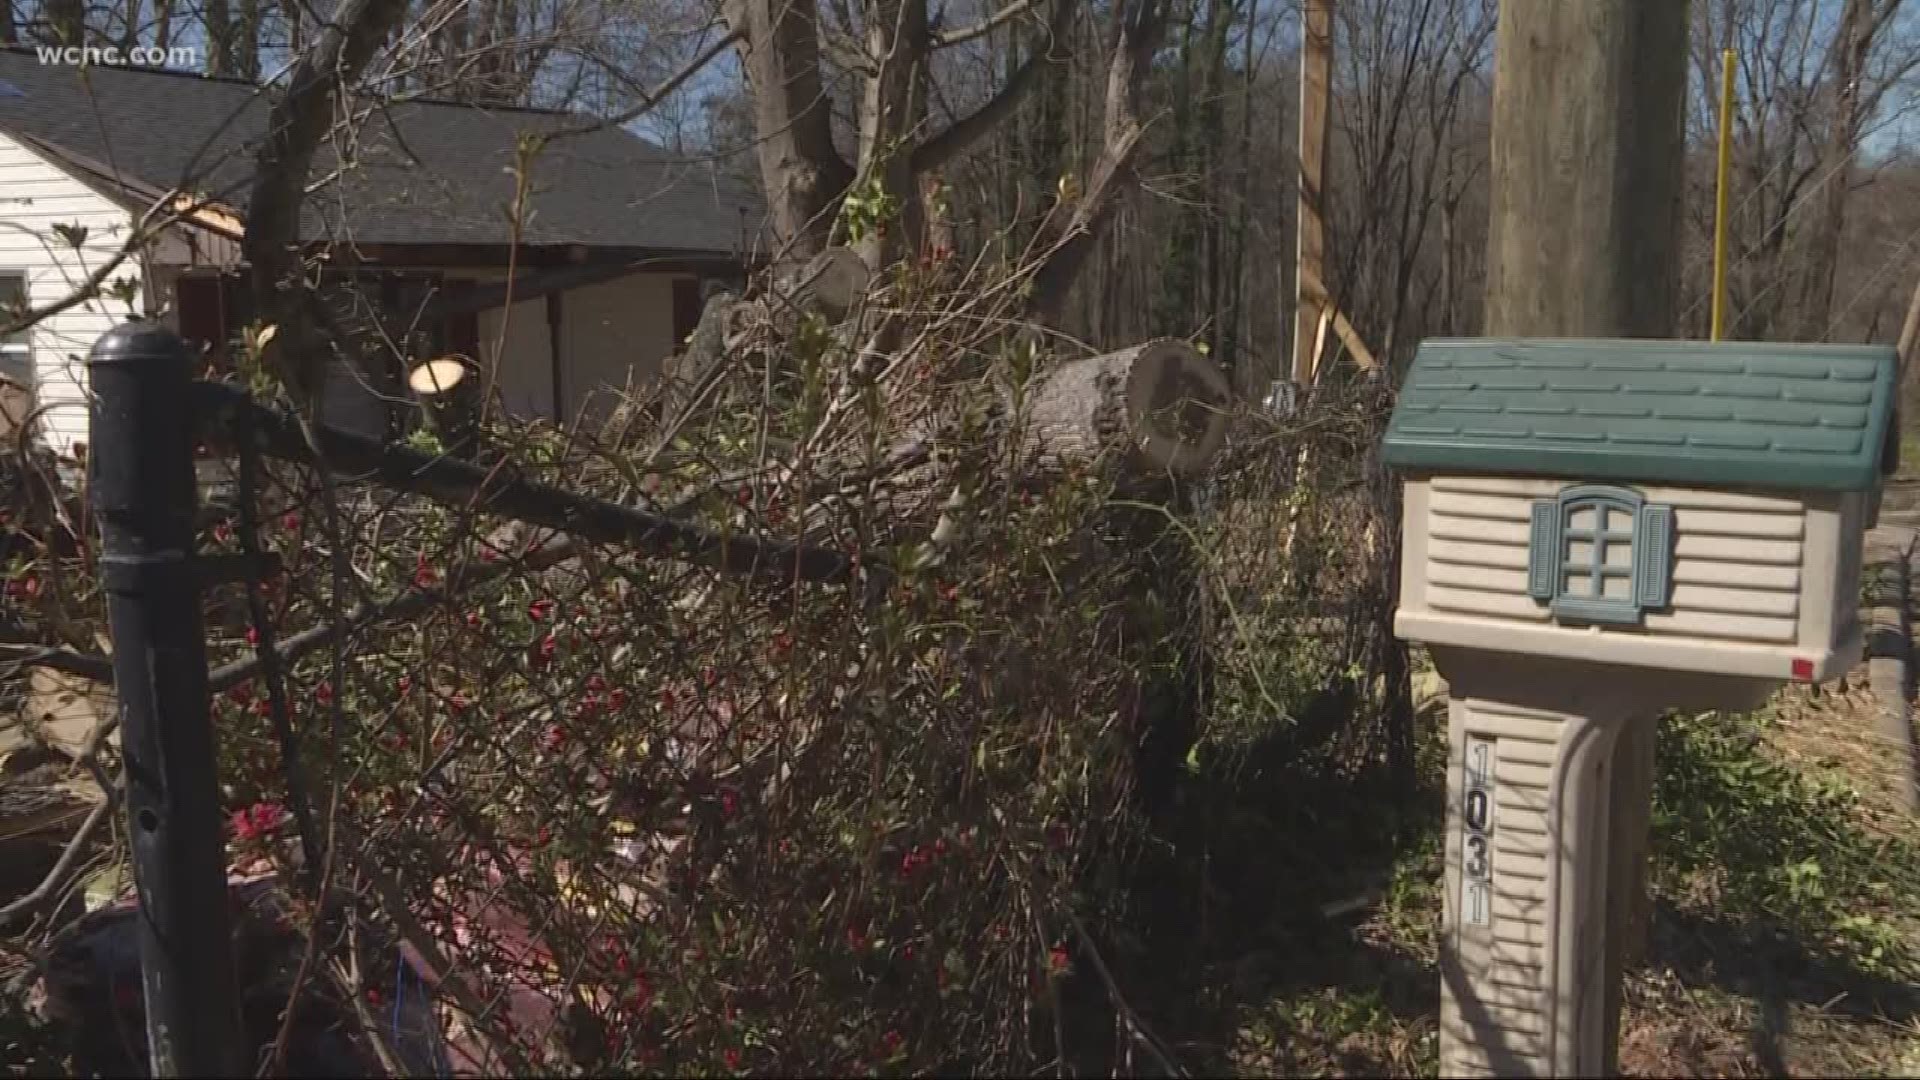 Homeowners in Gastonia believe the suspect committed an act of revenge.